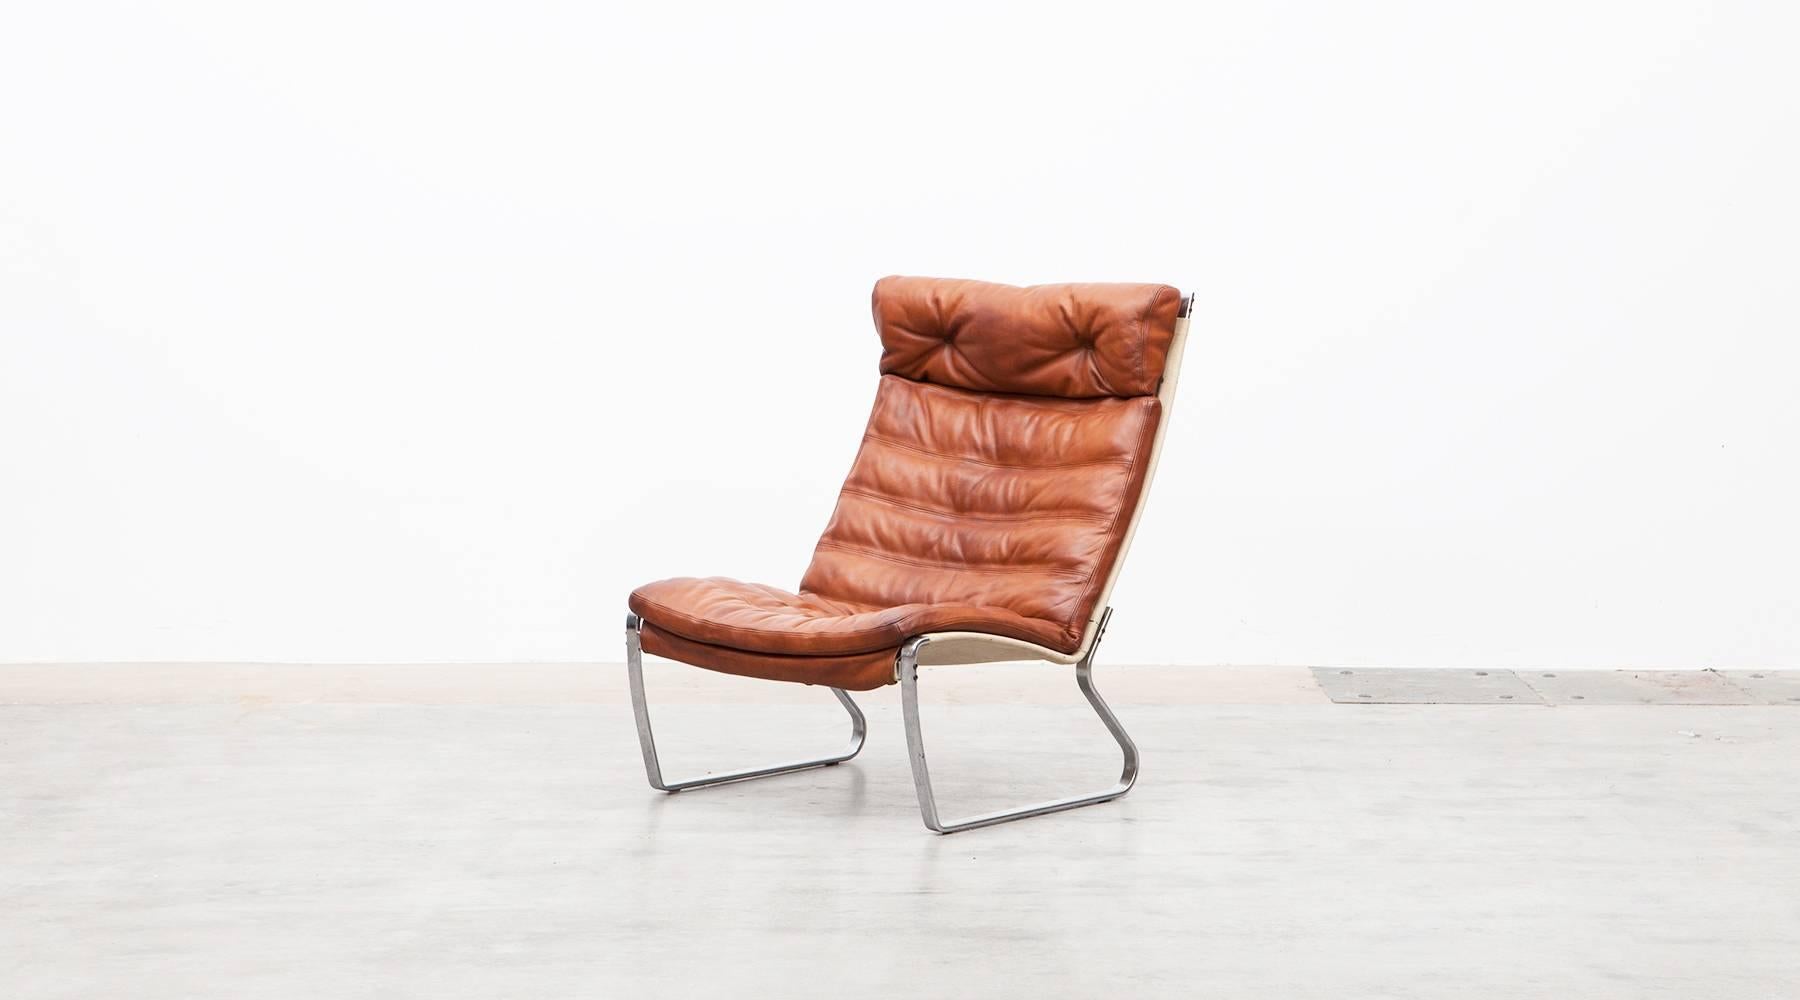 The seat and back of this armless easy chair is covered in orange leather and designed by Jørgen Kastholm. The chair is wide and inviting, tremendously comfortable. Manufactured by Kill International.

Together with fellow Scandinavian Design legend